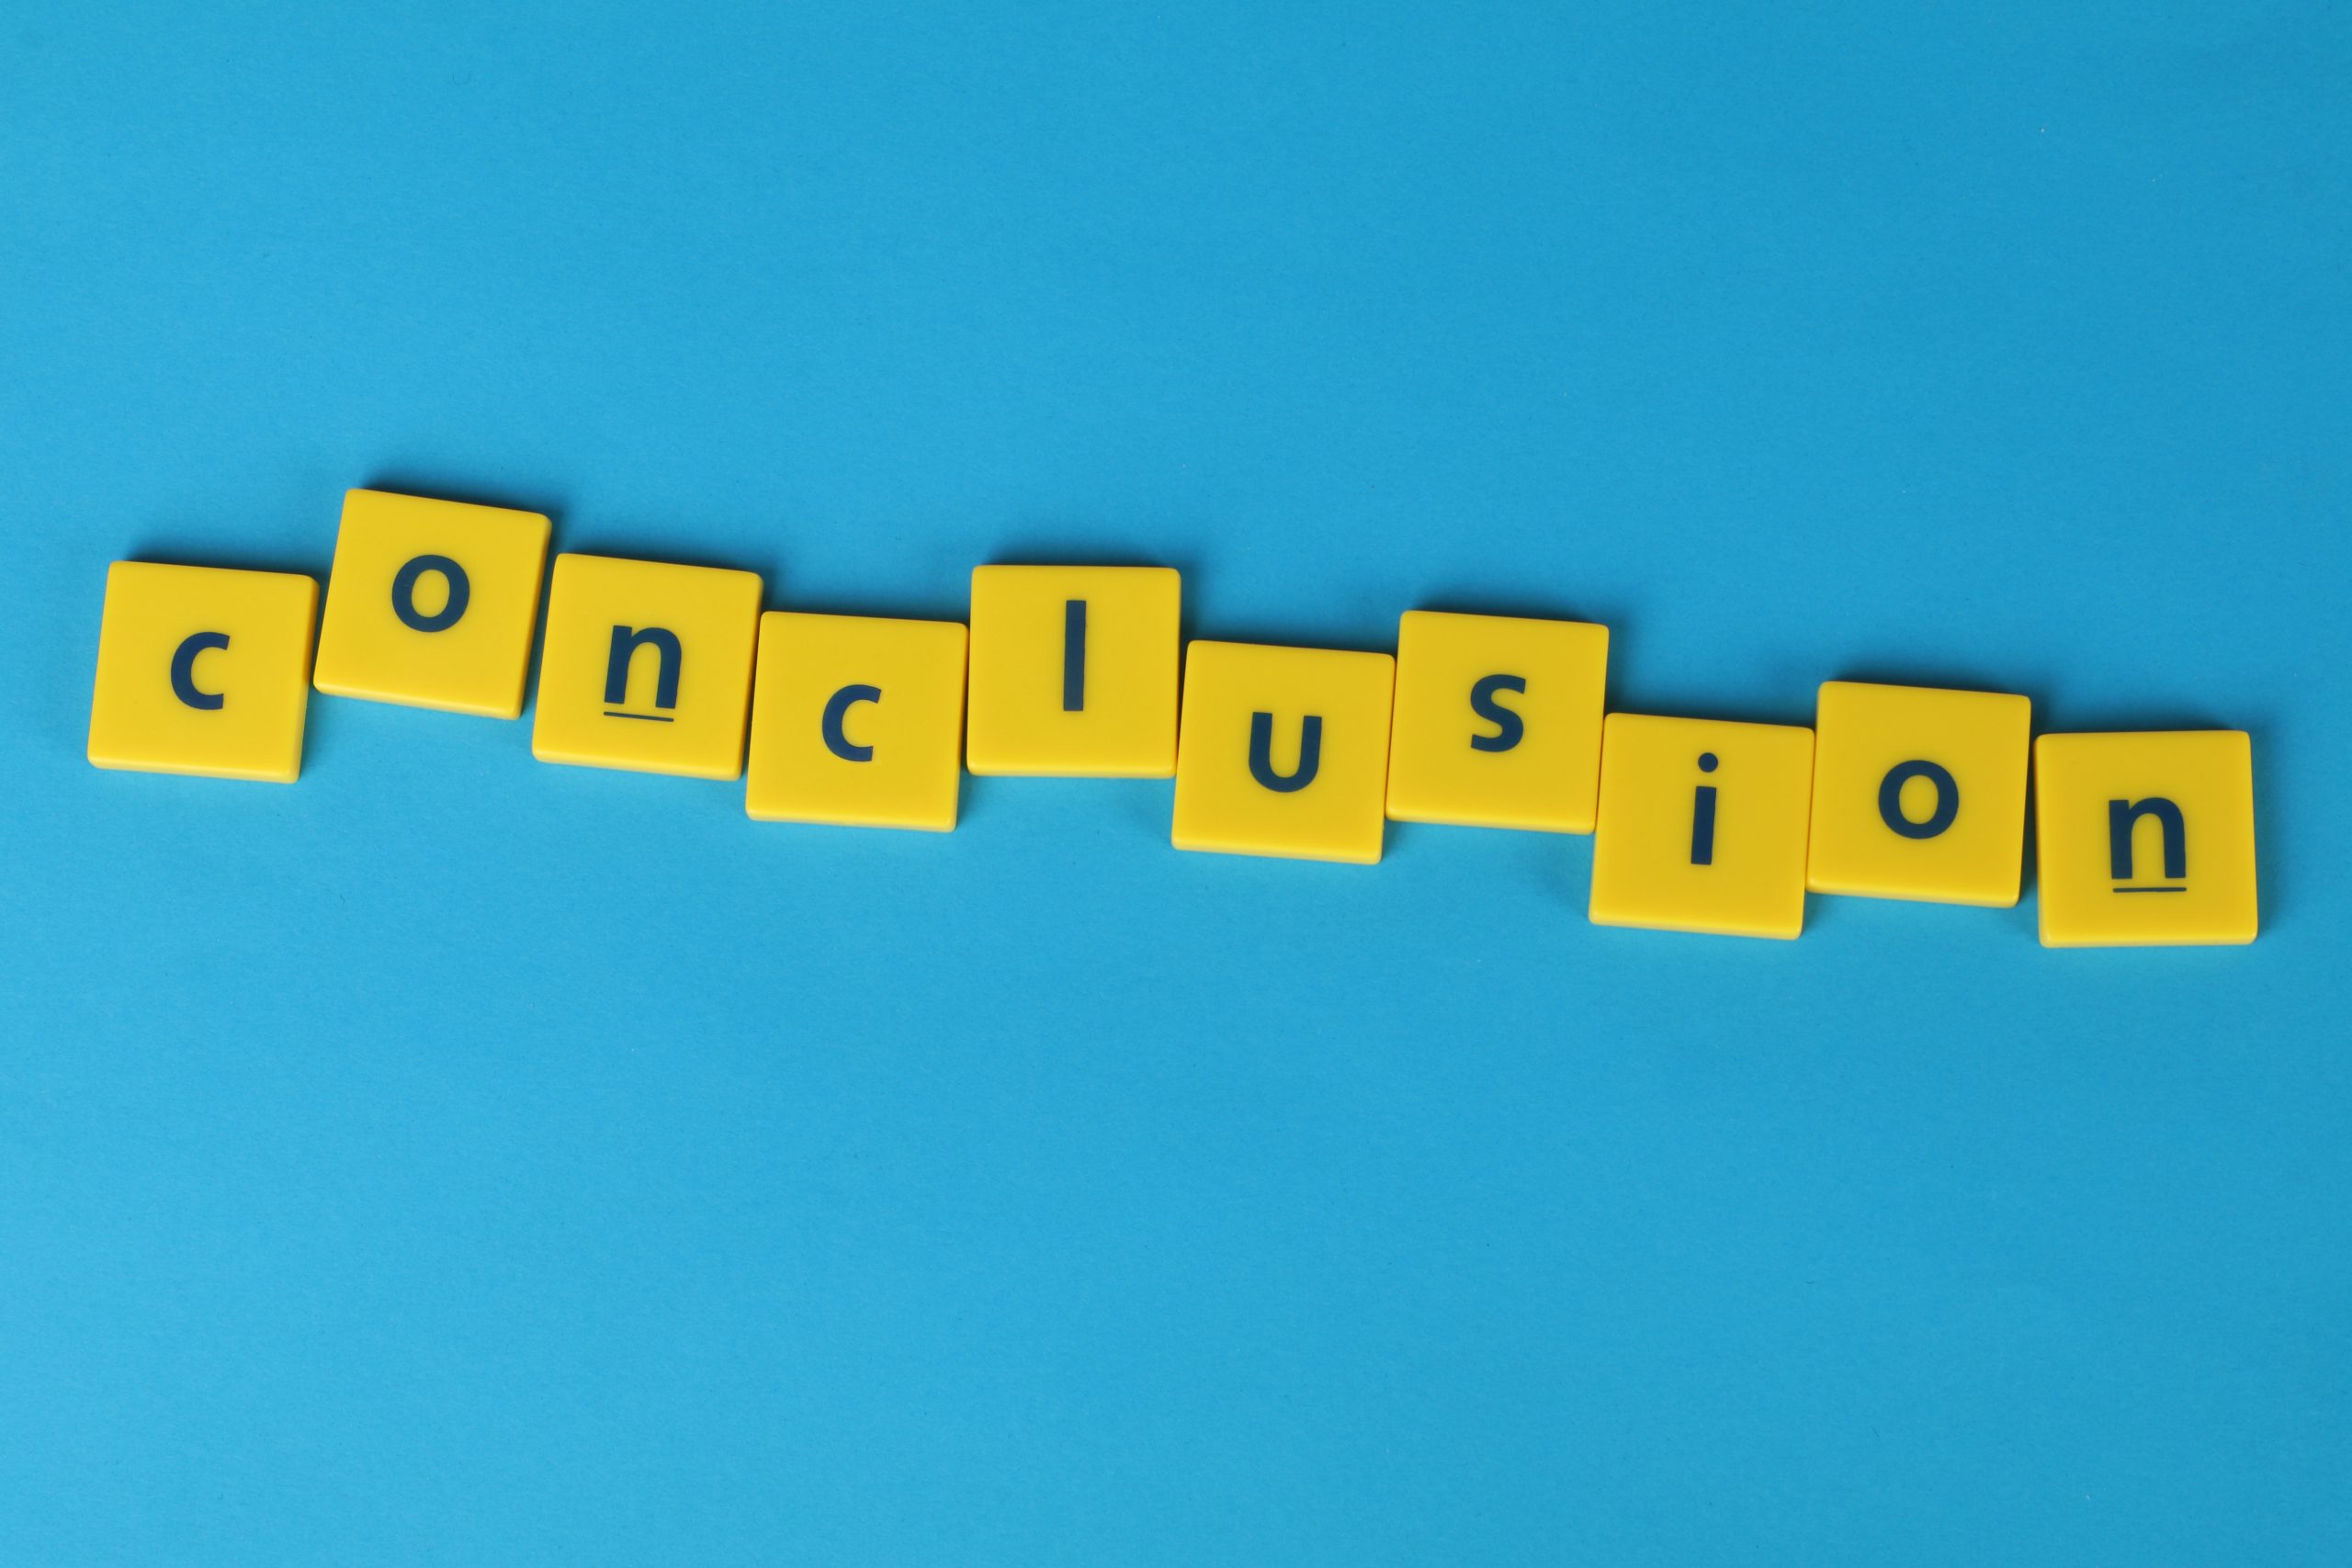 how to write an effective conclusion